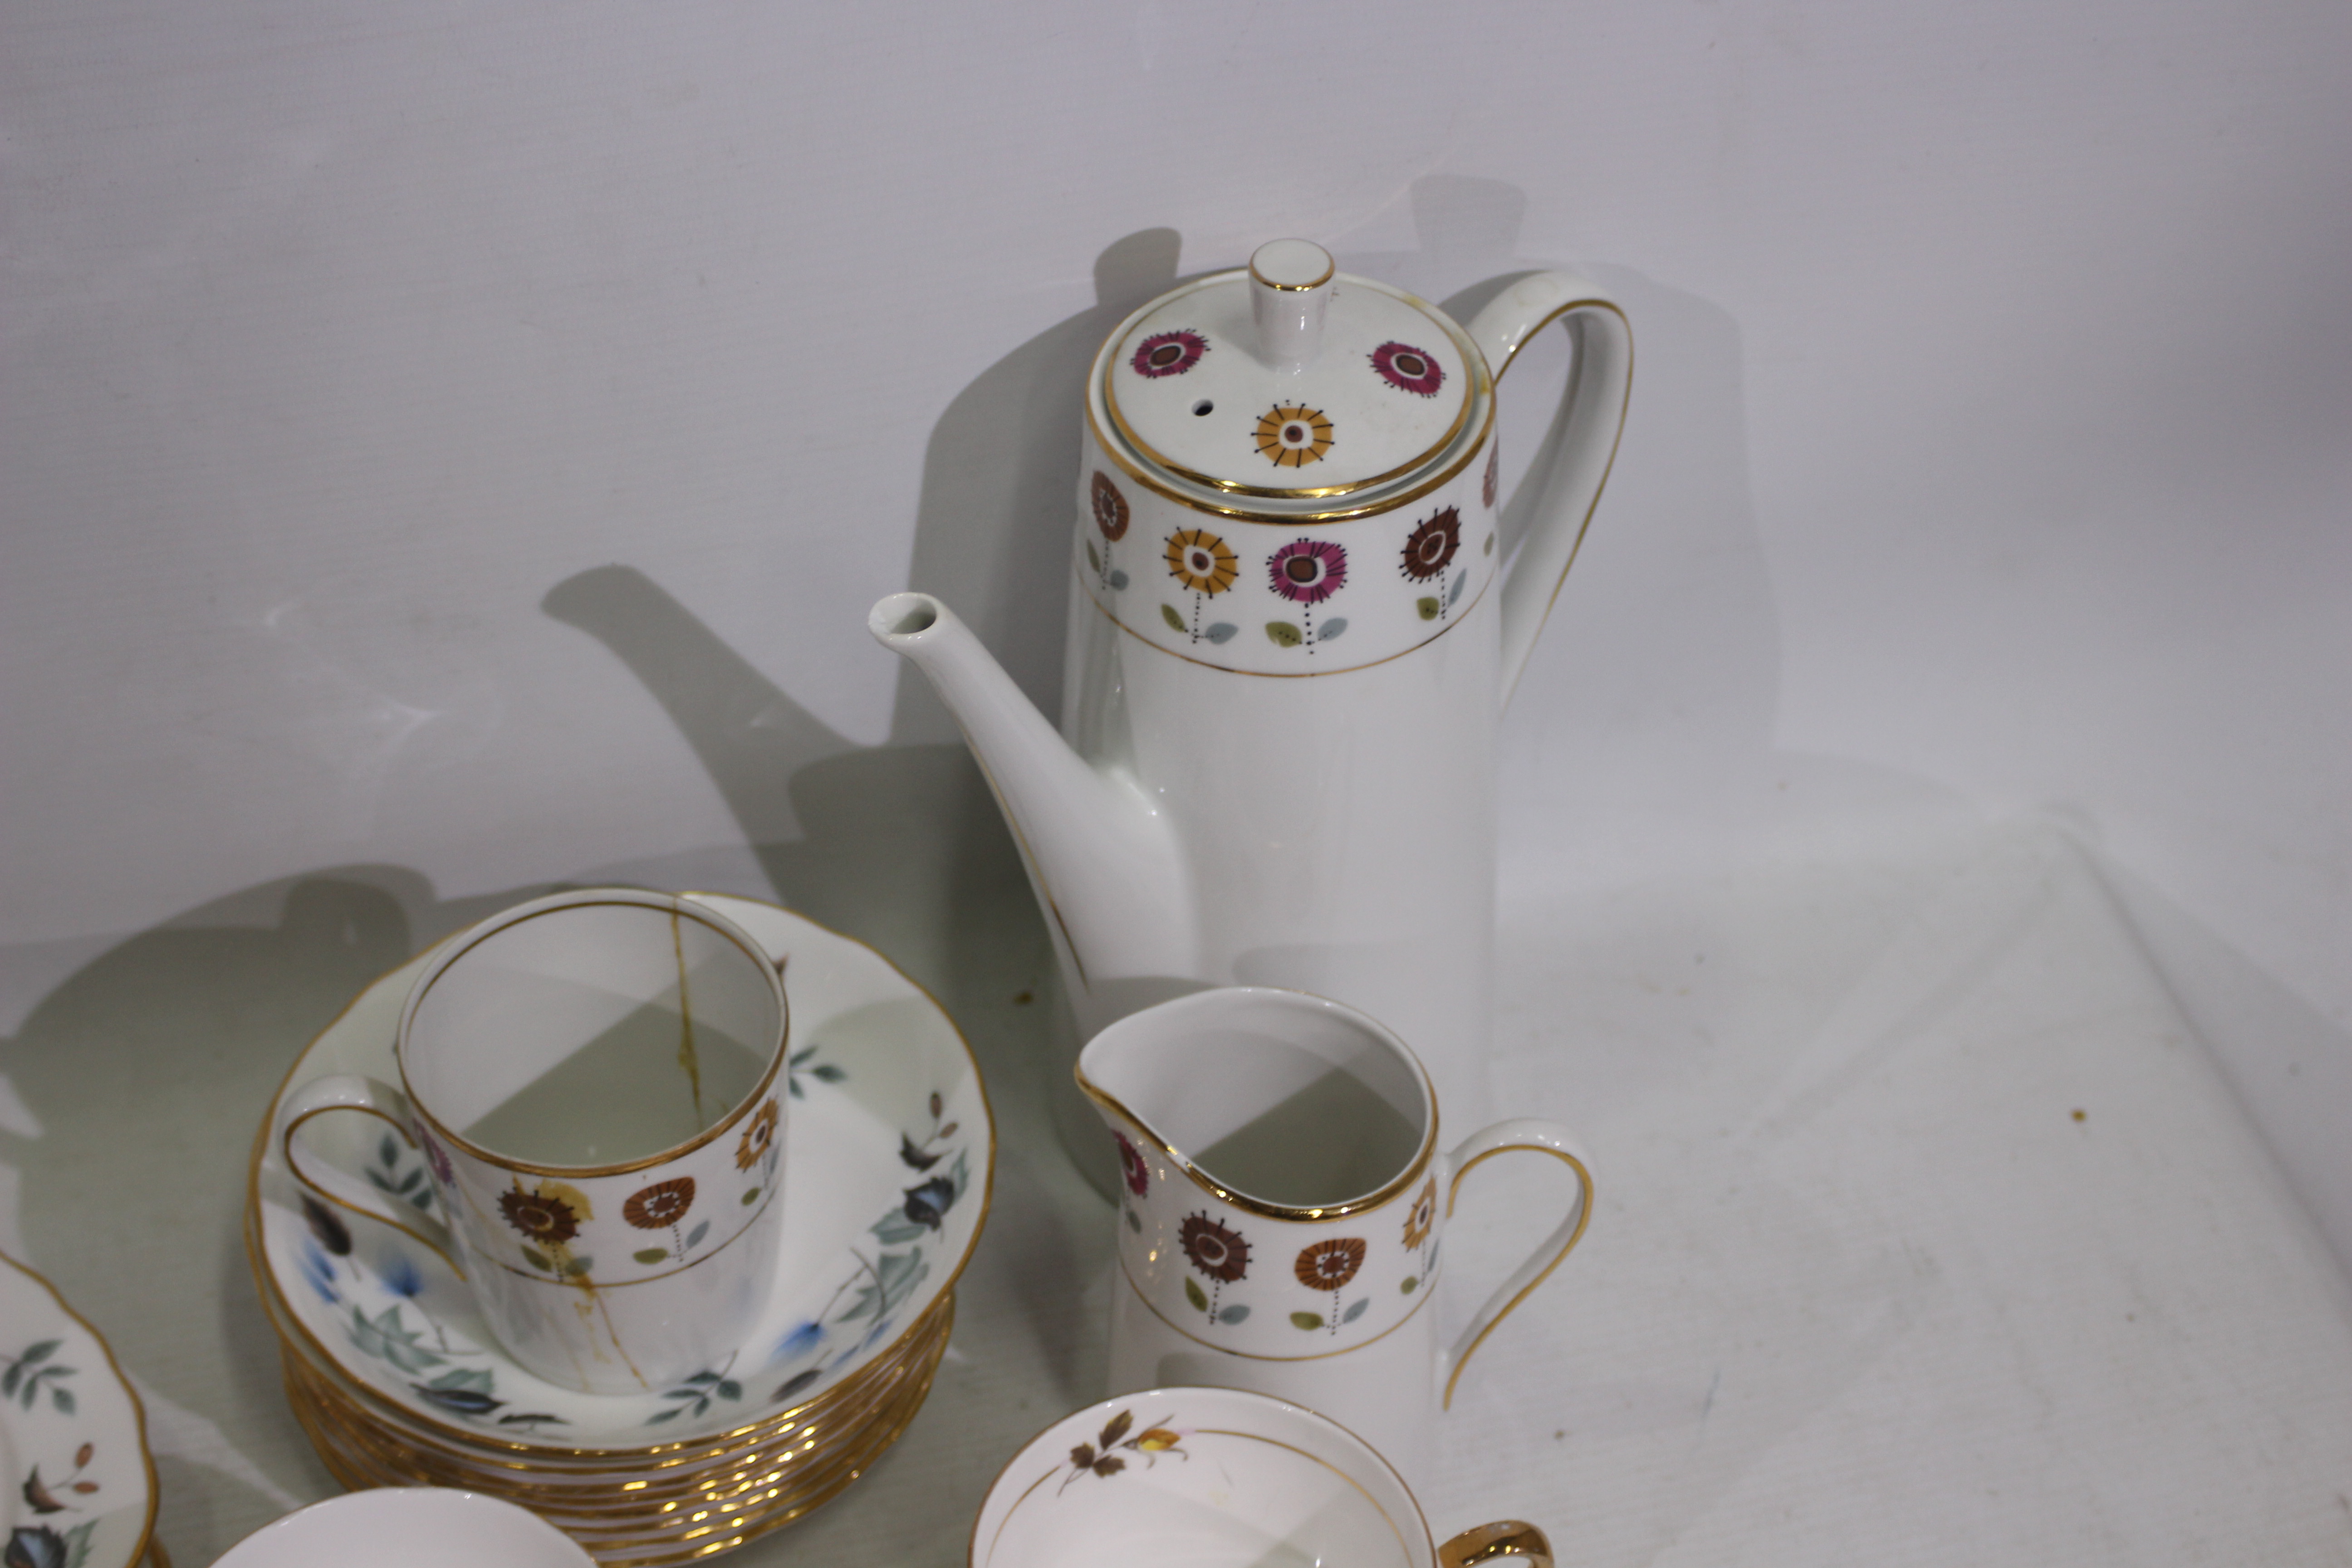 Walbrzych, Colclough, Royal Imperial - 3 x small ceramic tea sets - Lot includes teapots, plates, - Image 2 of 4